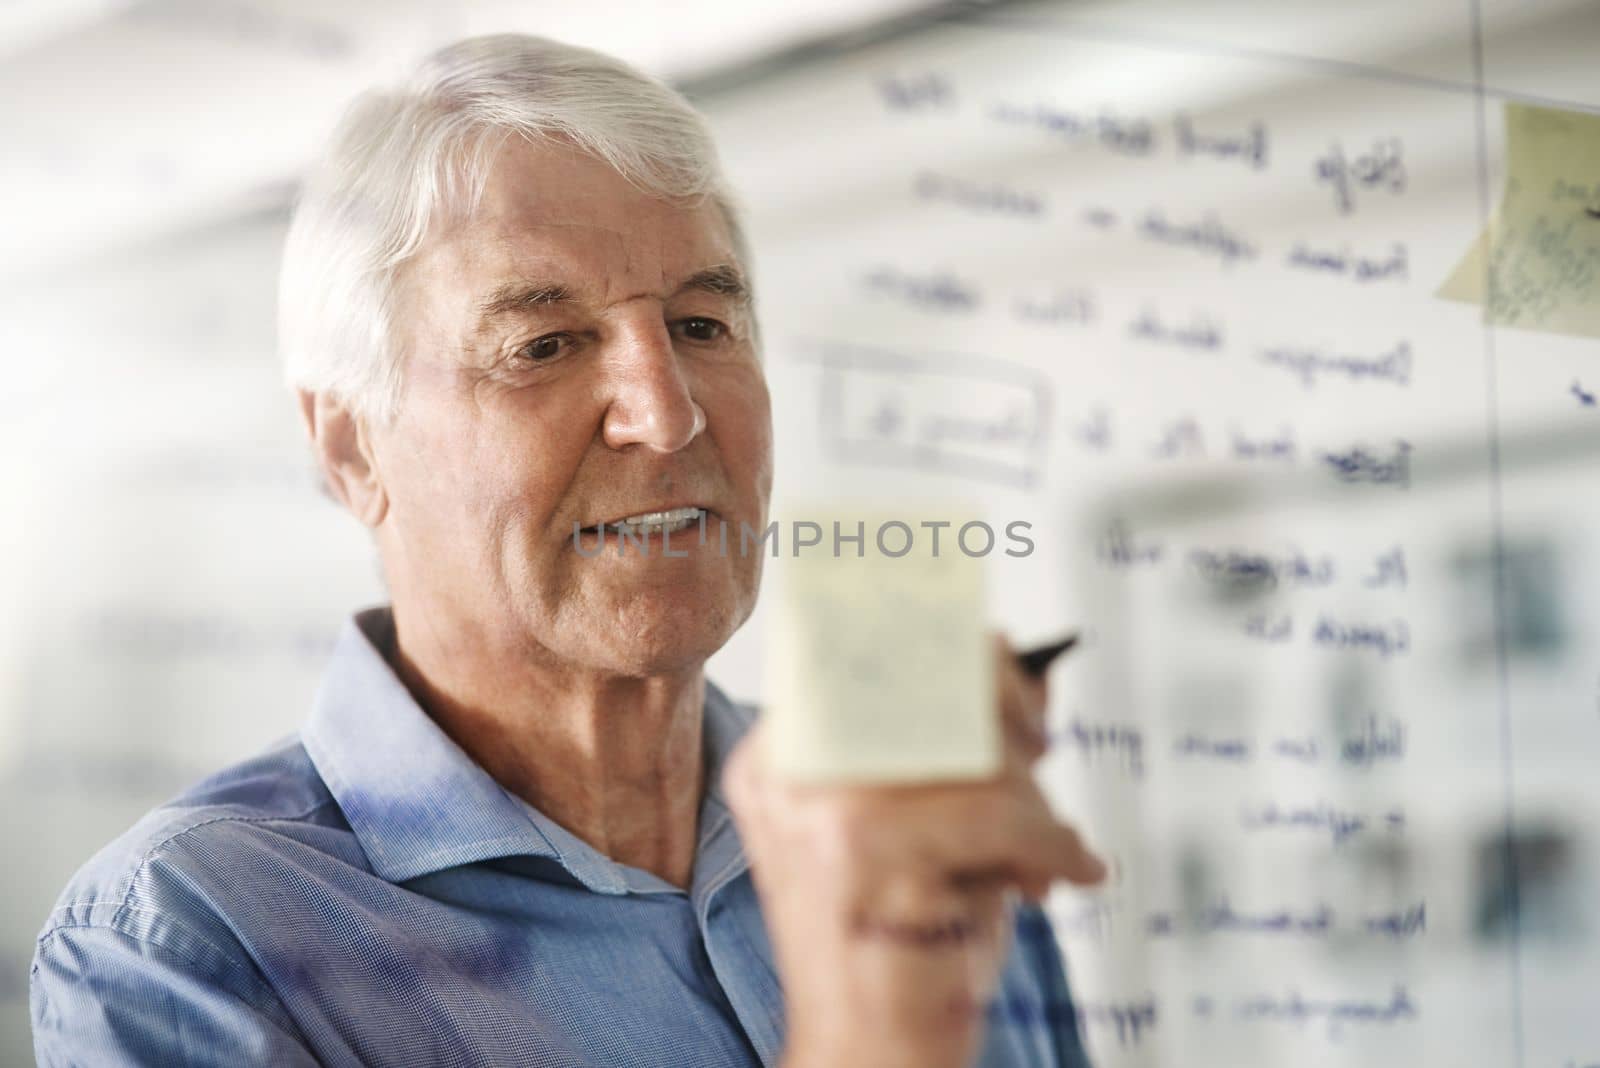 Owning a business is planning and execution. a senior businessman writing down ideas with a pen marker on a glass wall in the office